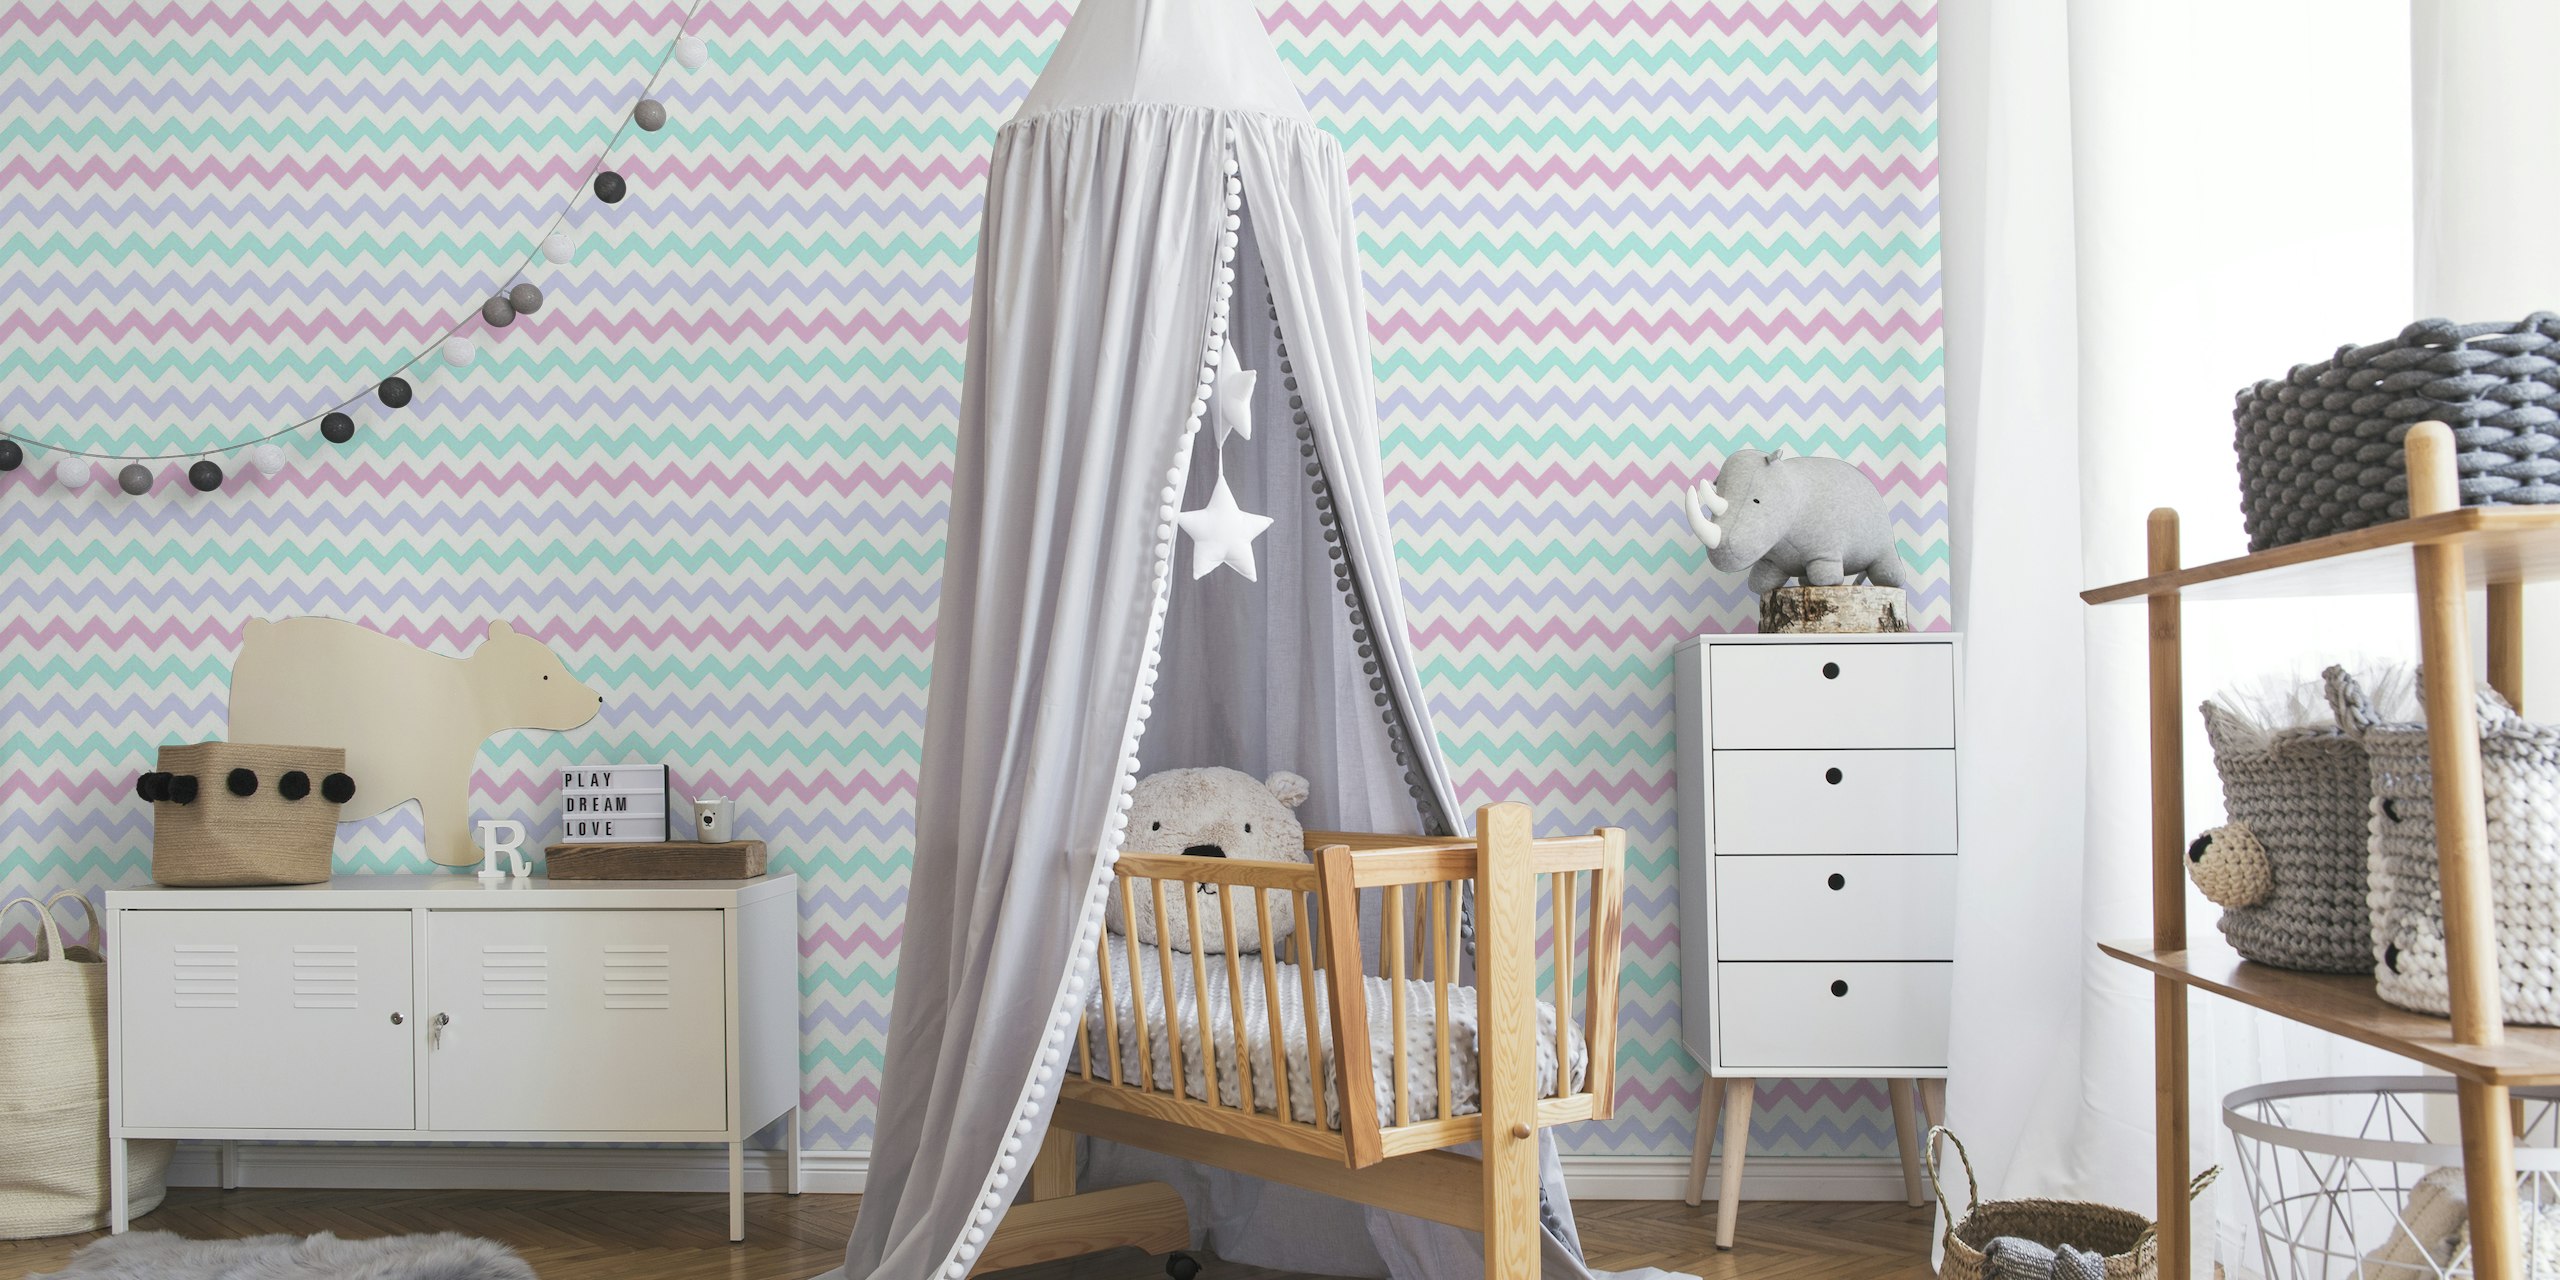 Soft pastel chevron pattern in pink, blue, and teal for wall murals